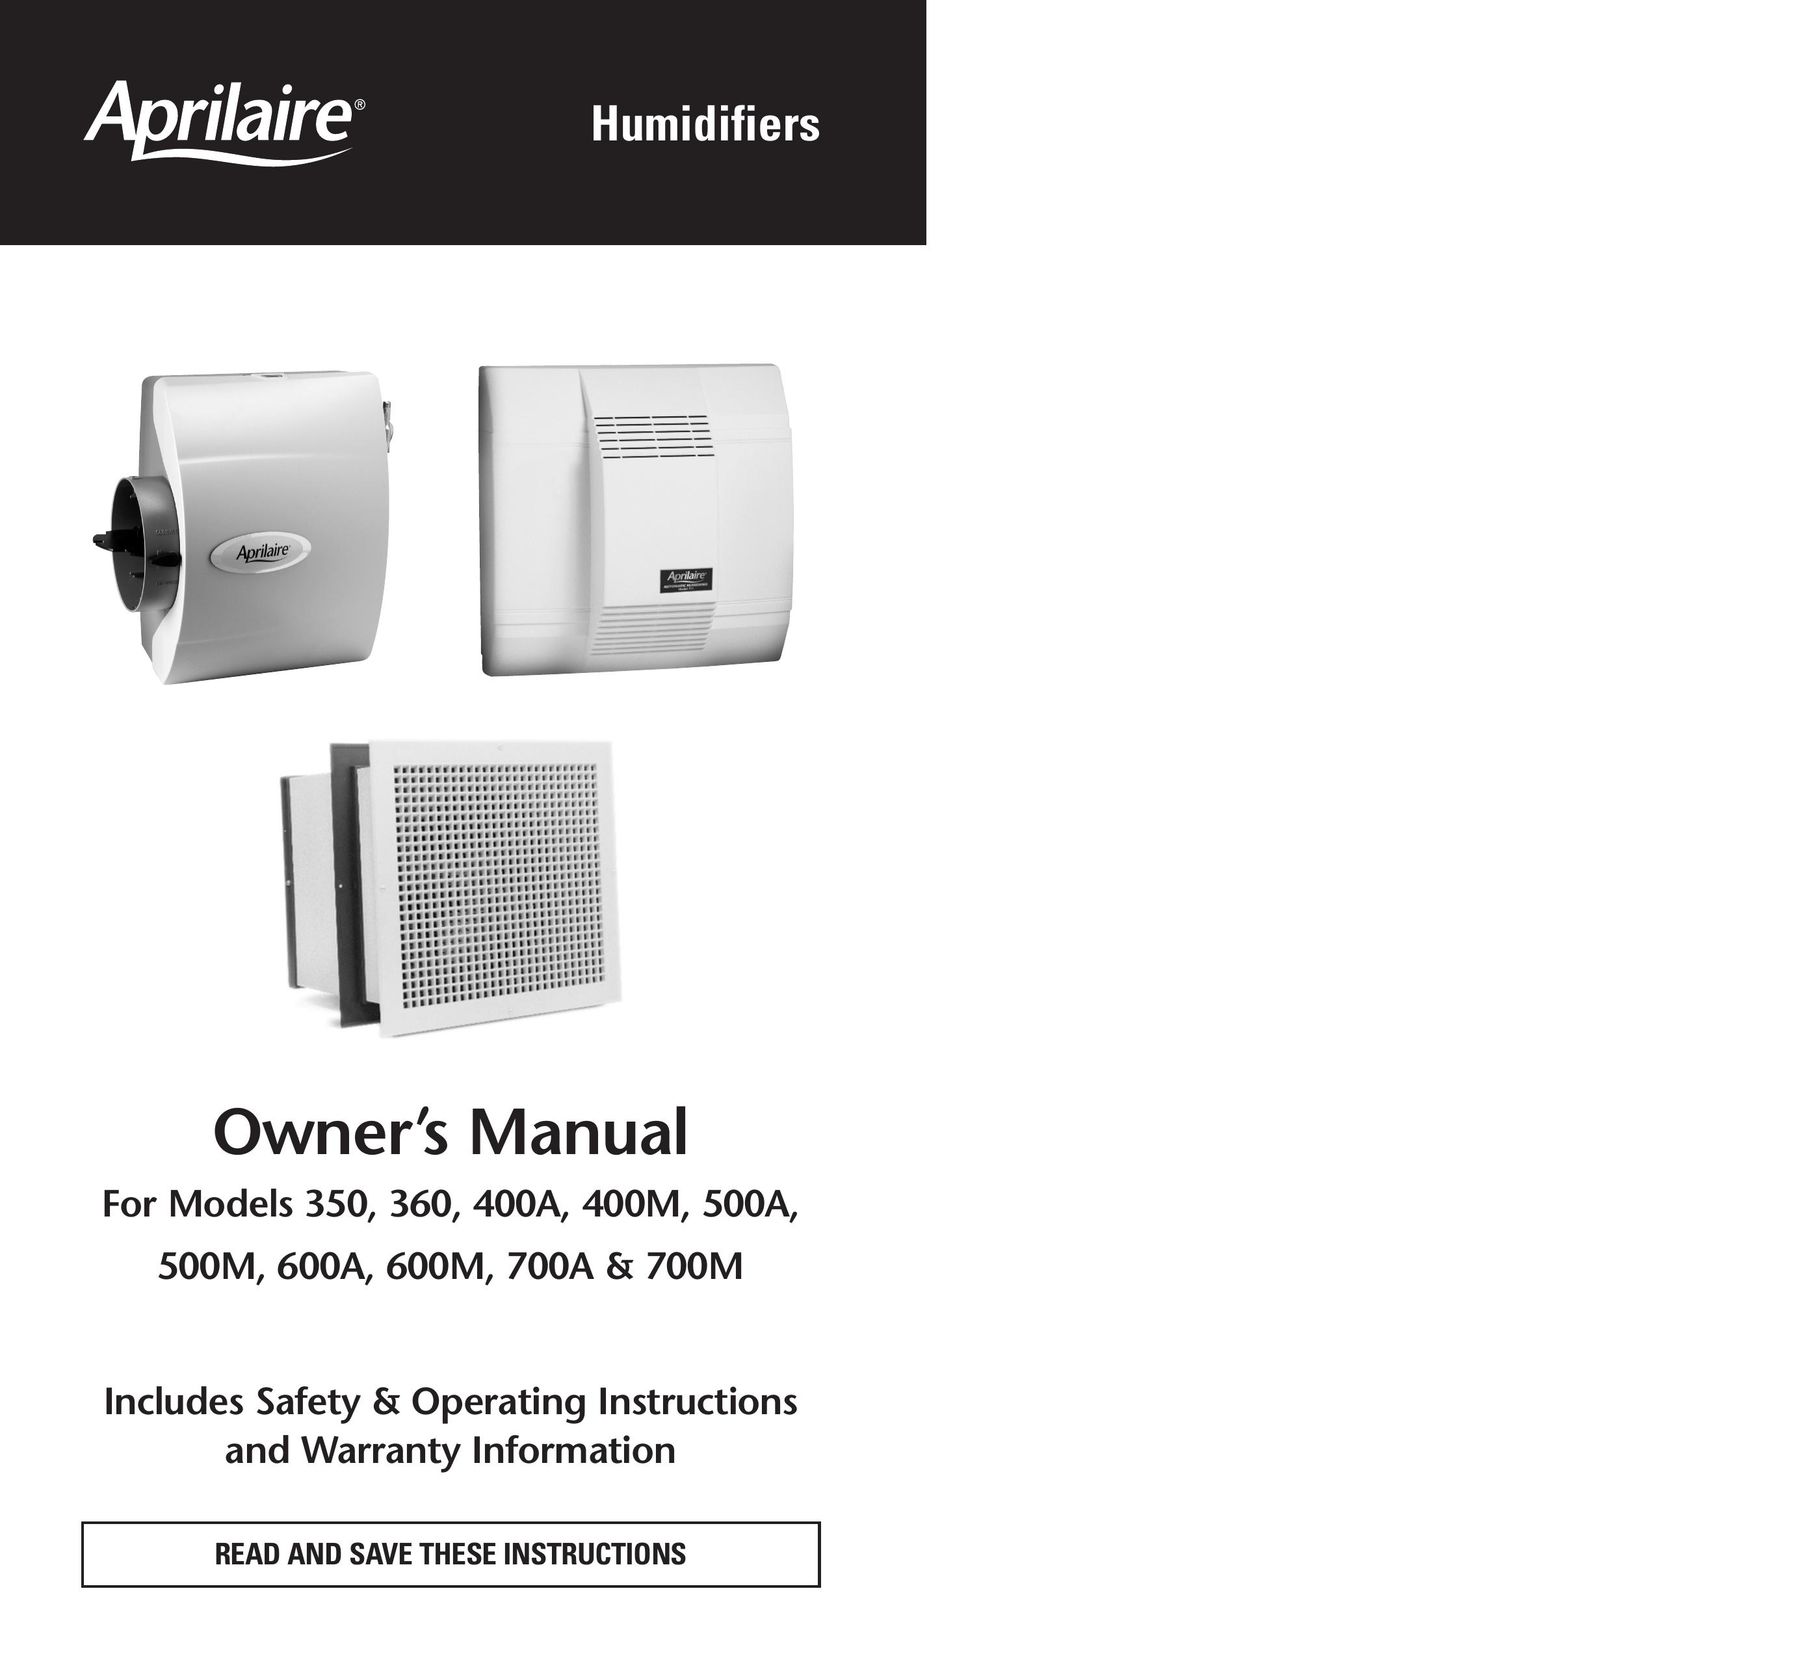 Aprilaire 500M Humidifier User Manual